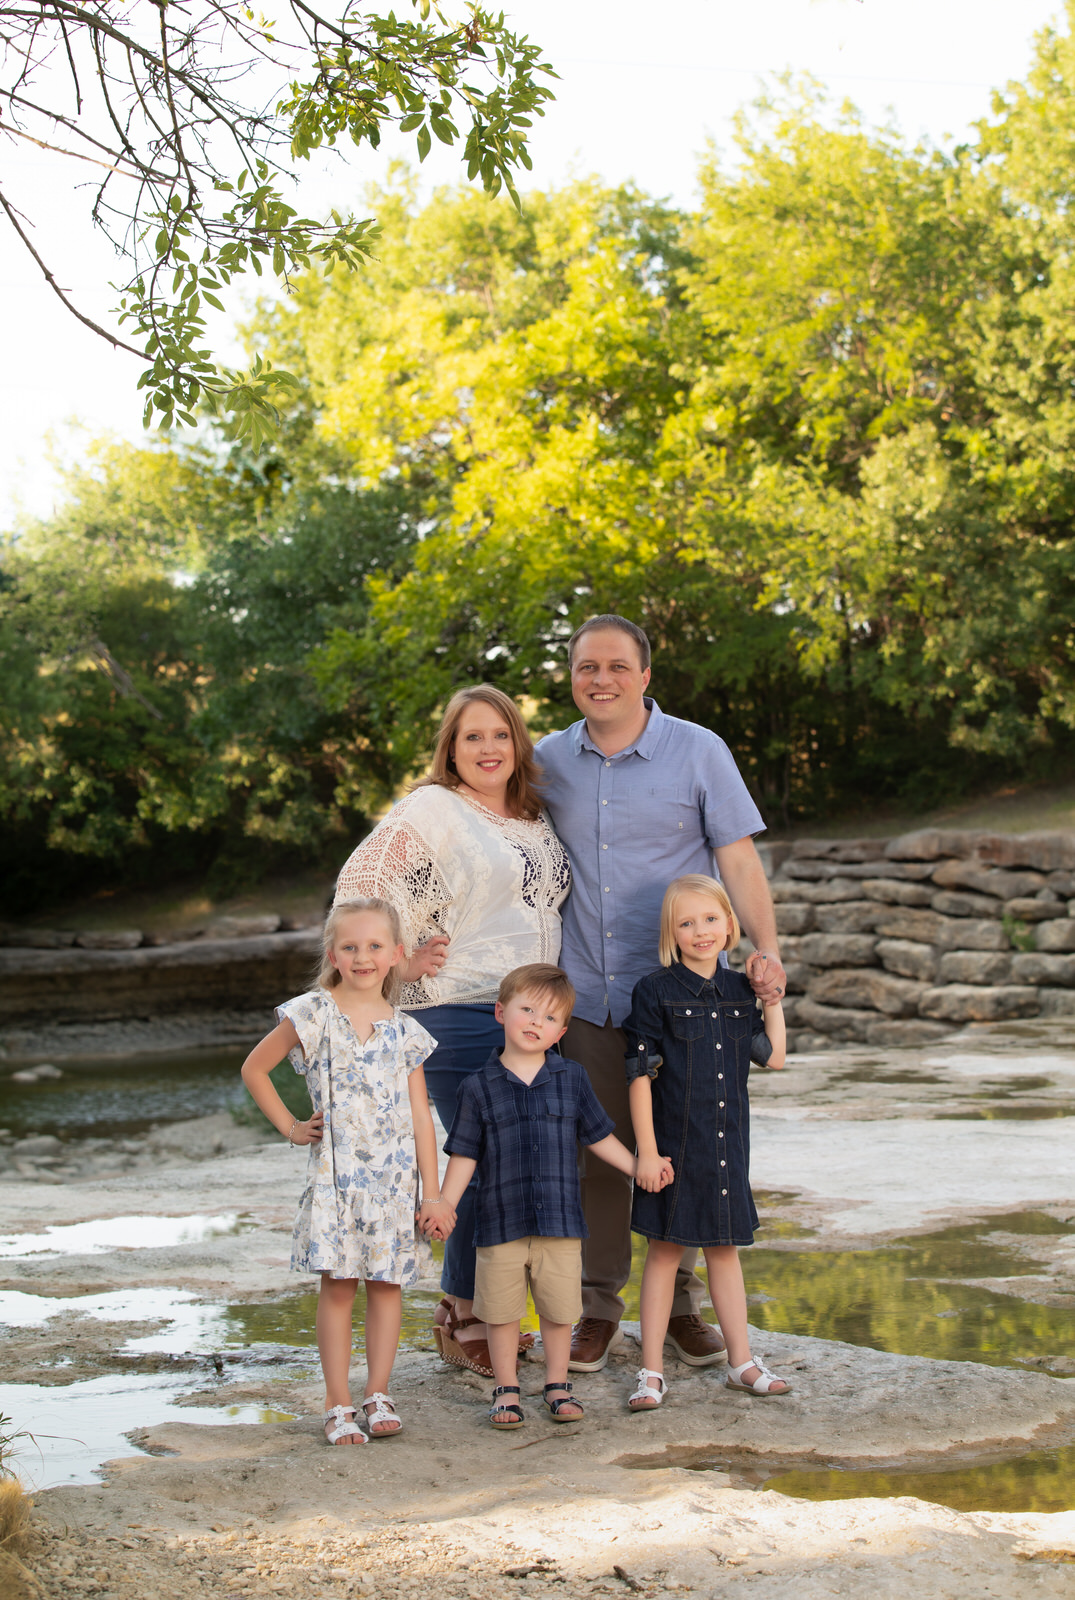 A family of five hold hands while standing on the edge of a river with a stone wall and trees behind them